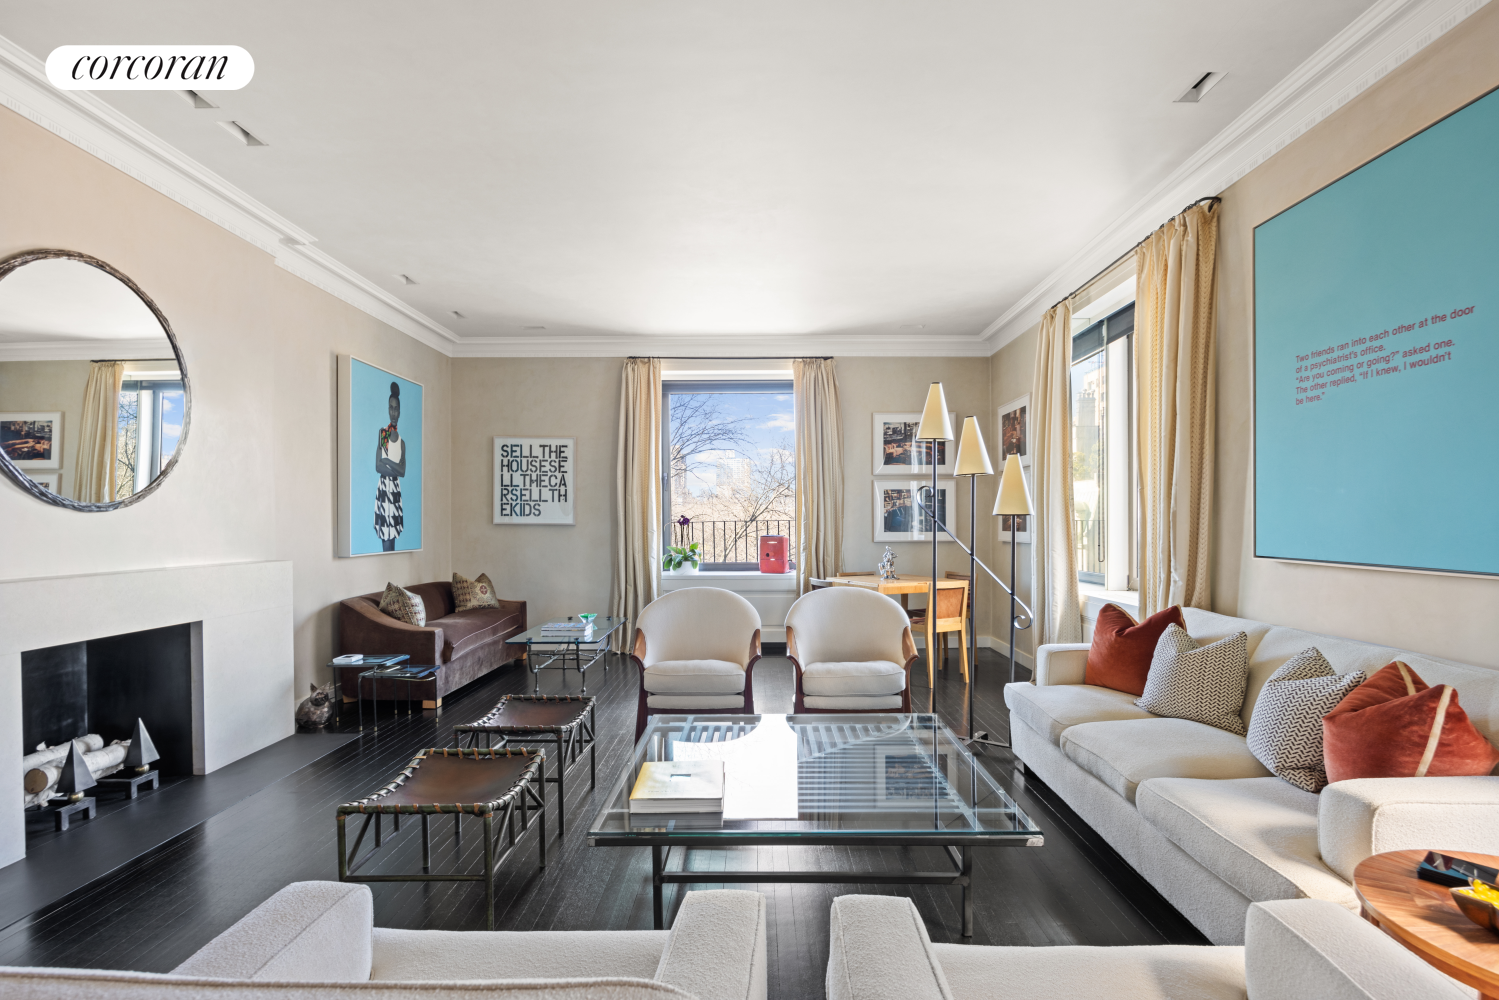 920 5th Avenue 5A, Lenox Hill, Upper East Side, NYC - 4 Bedrooms  
4.5 Bathrooms  
9 Rooms - 